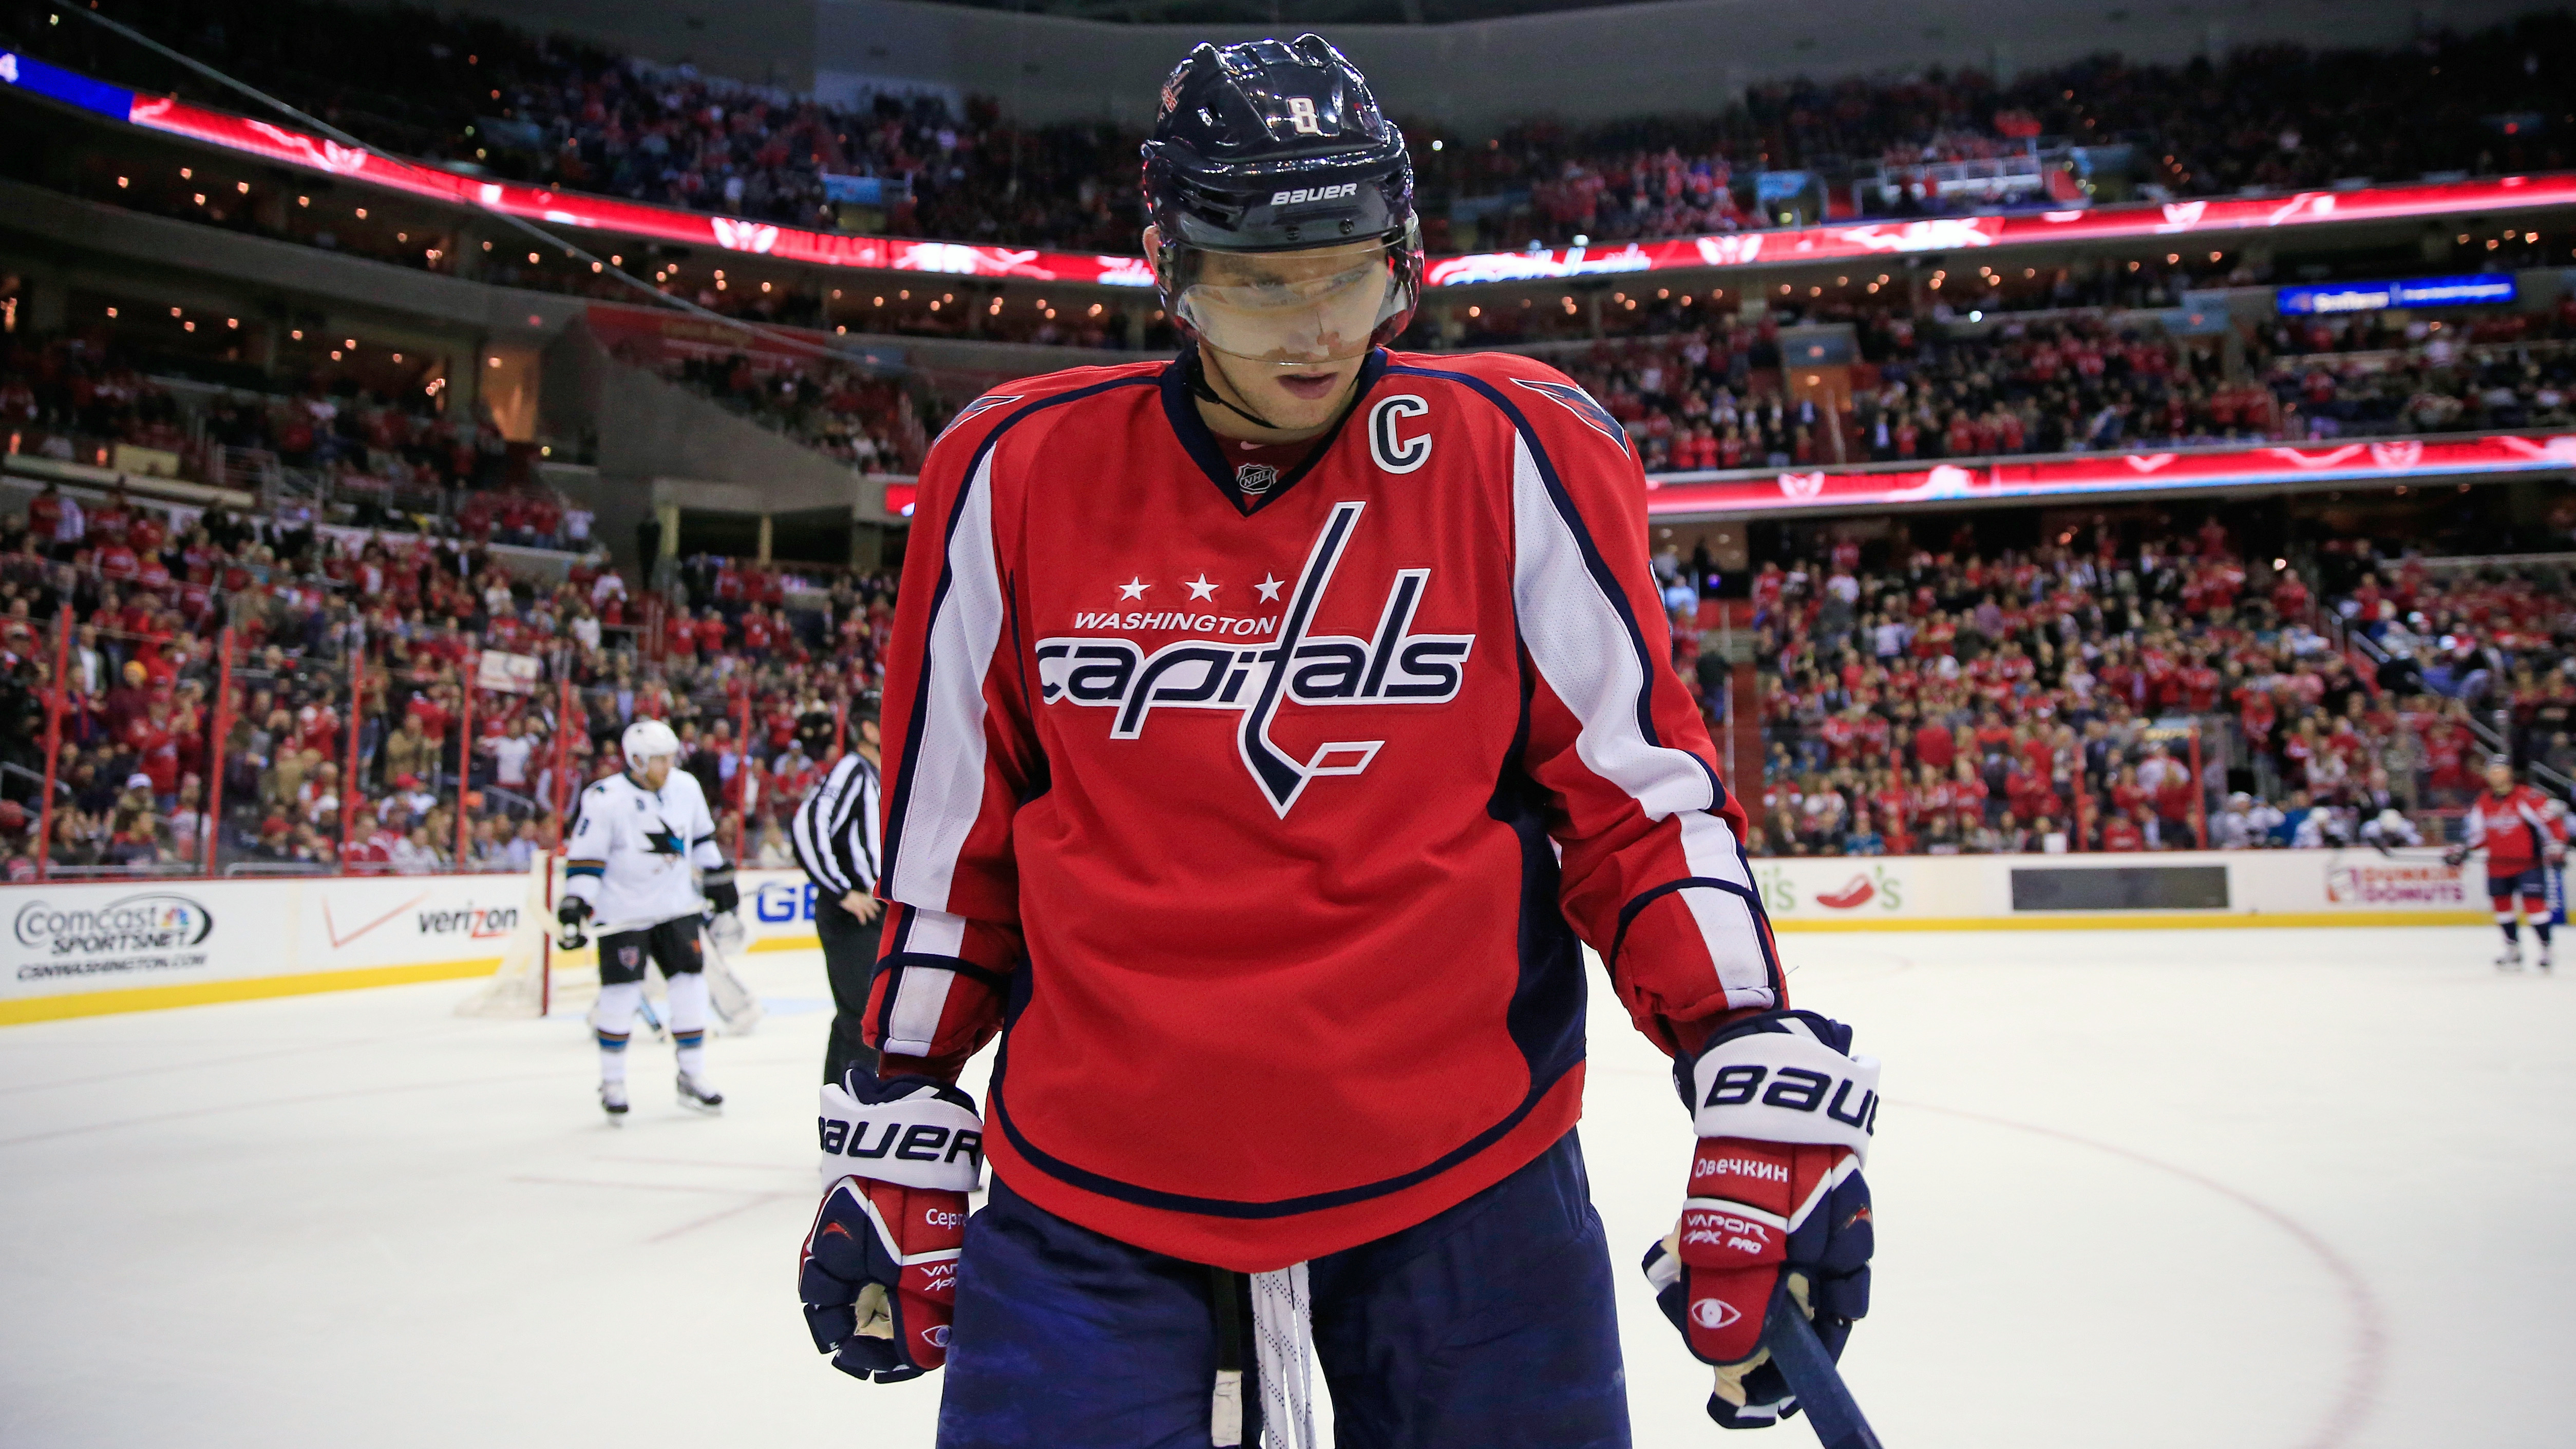 Alex Ovechkin's Plus-Minus Rating Is 